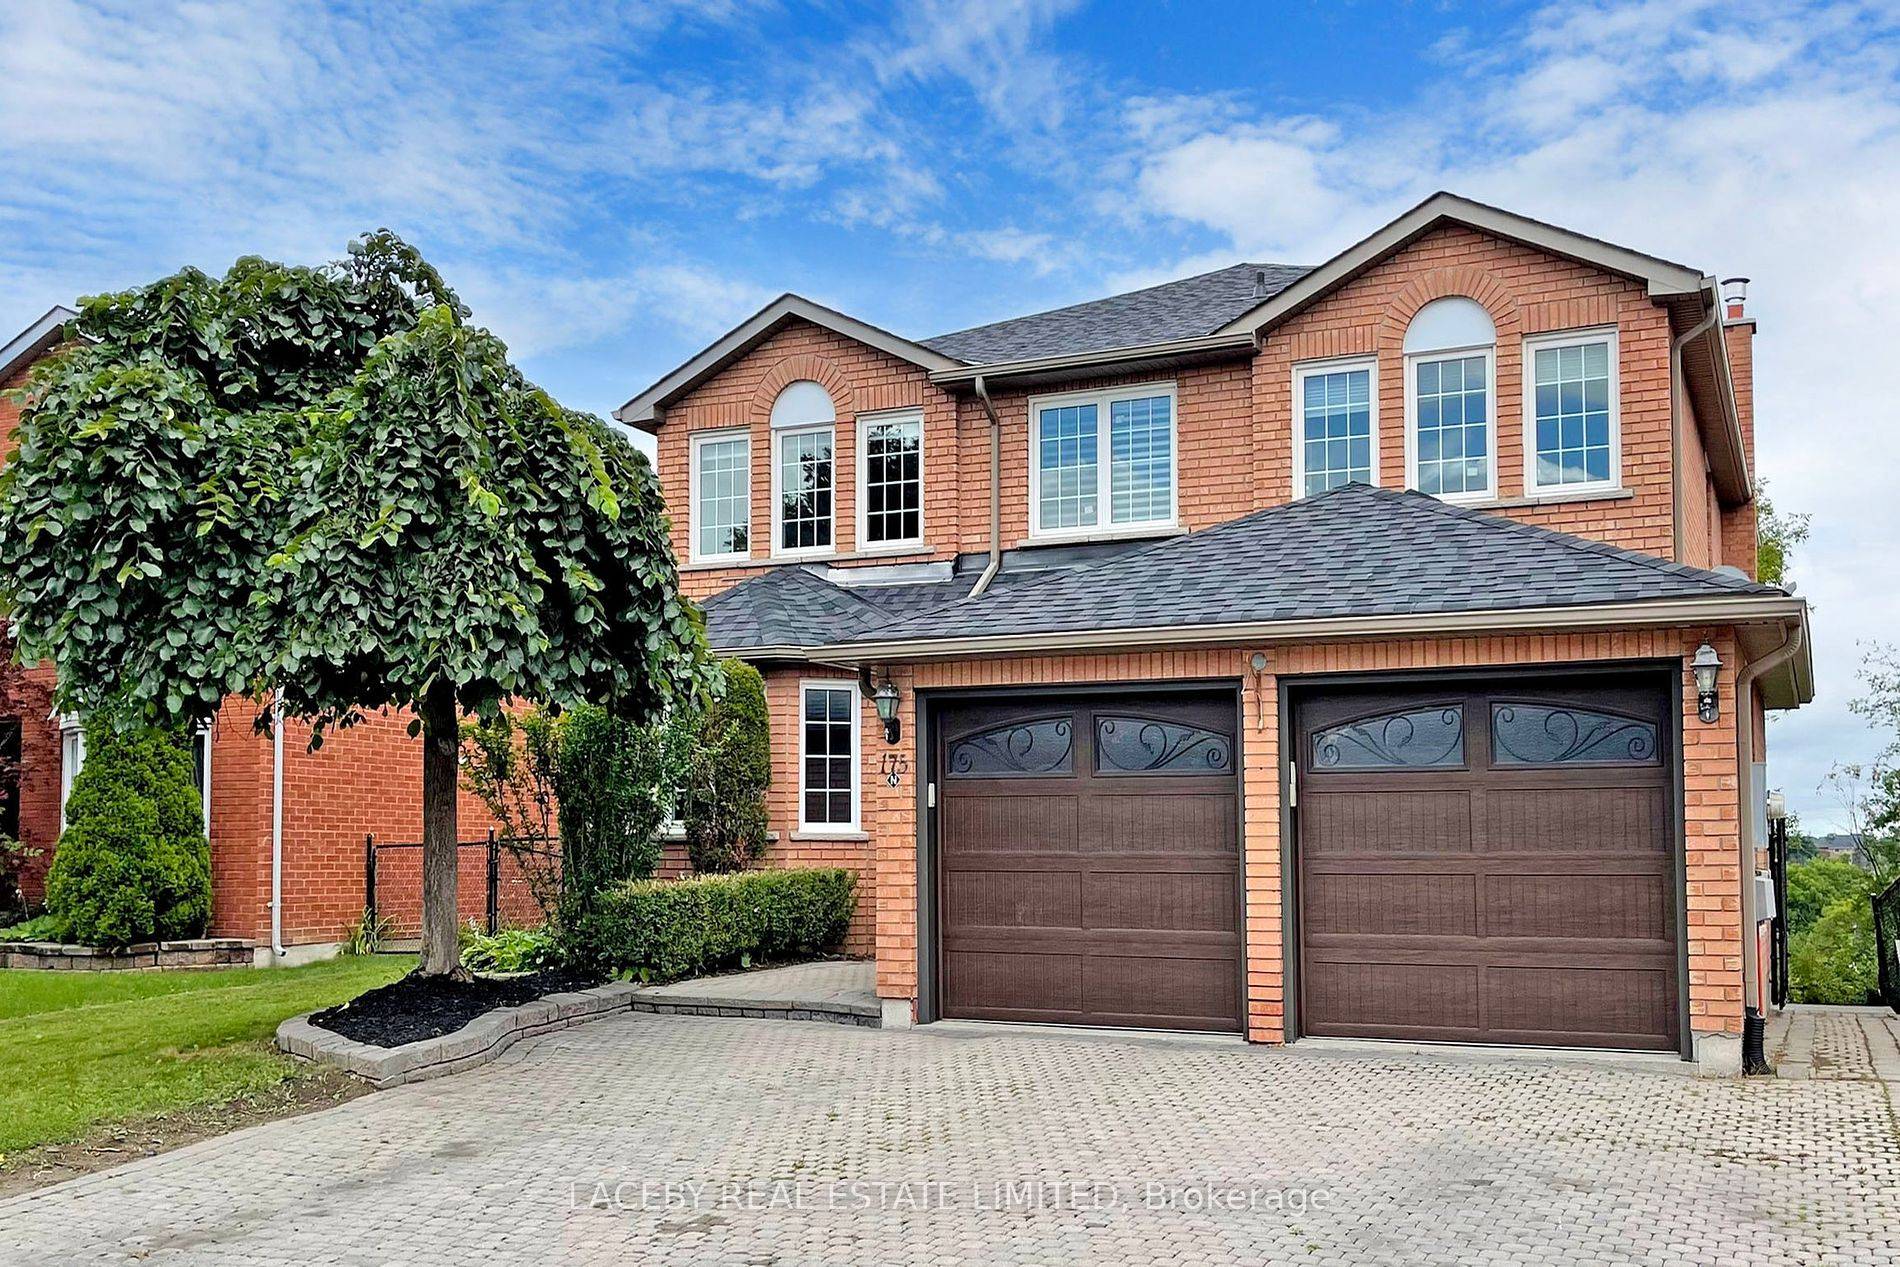 4 Bedroom Home Upgraded from Top to bottom, in Sought After Armitage Village Neighborhood On a 50ft Lot, Backing onto Paul Semple Park Greenspace.